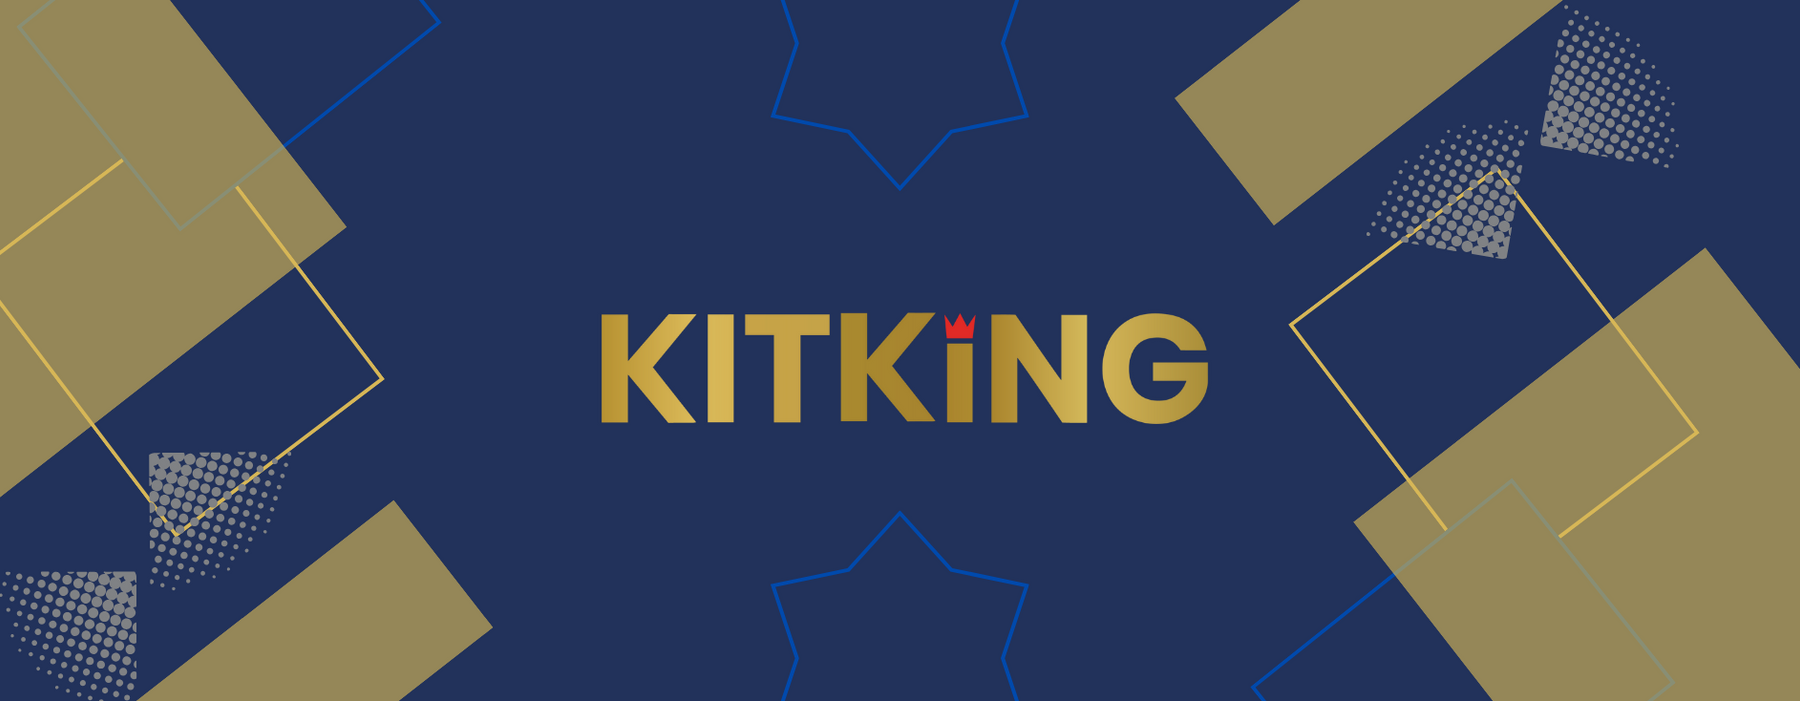 KitKing: The History of Teamwear Excellence